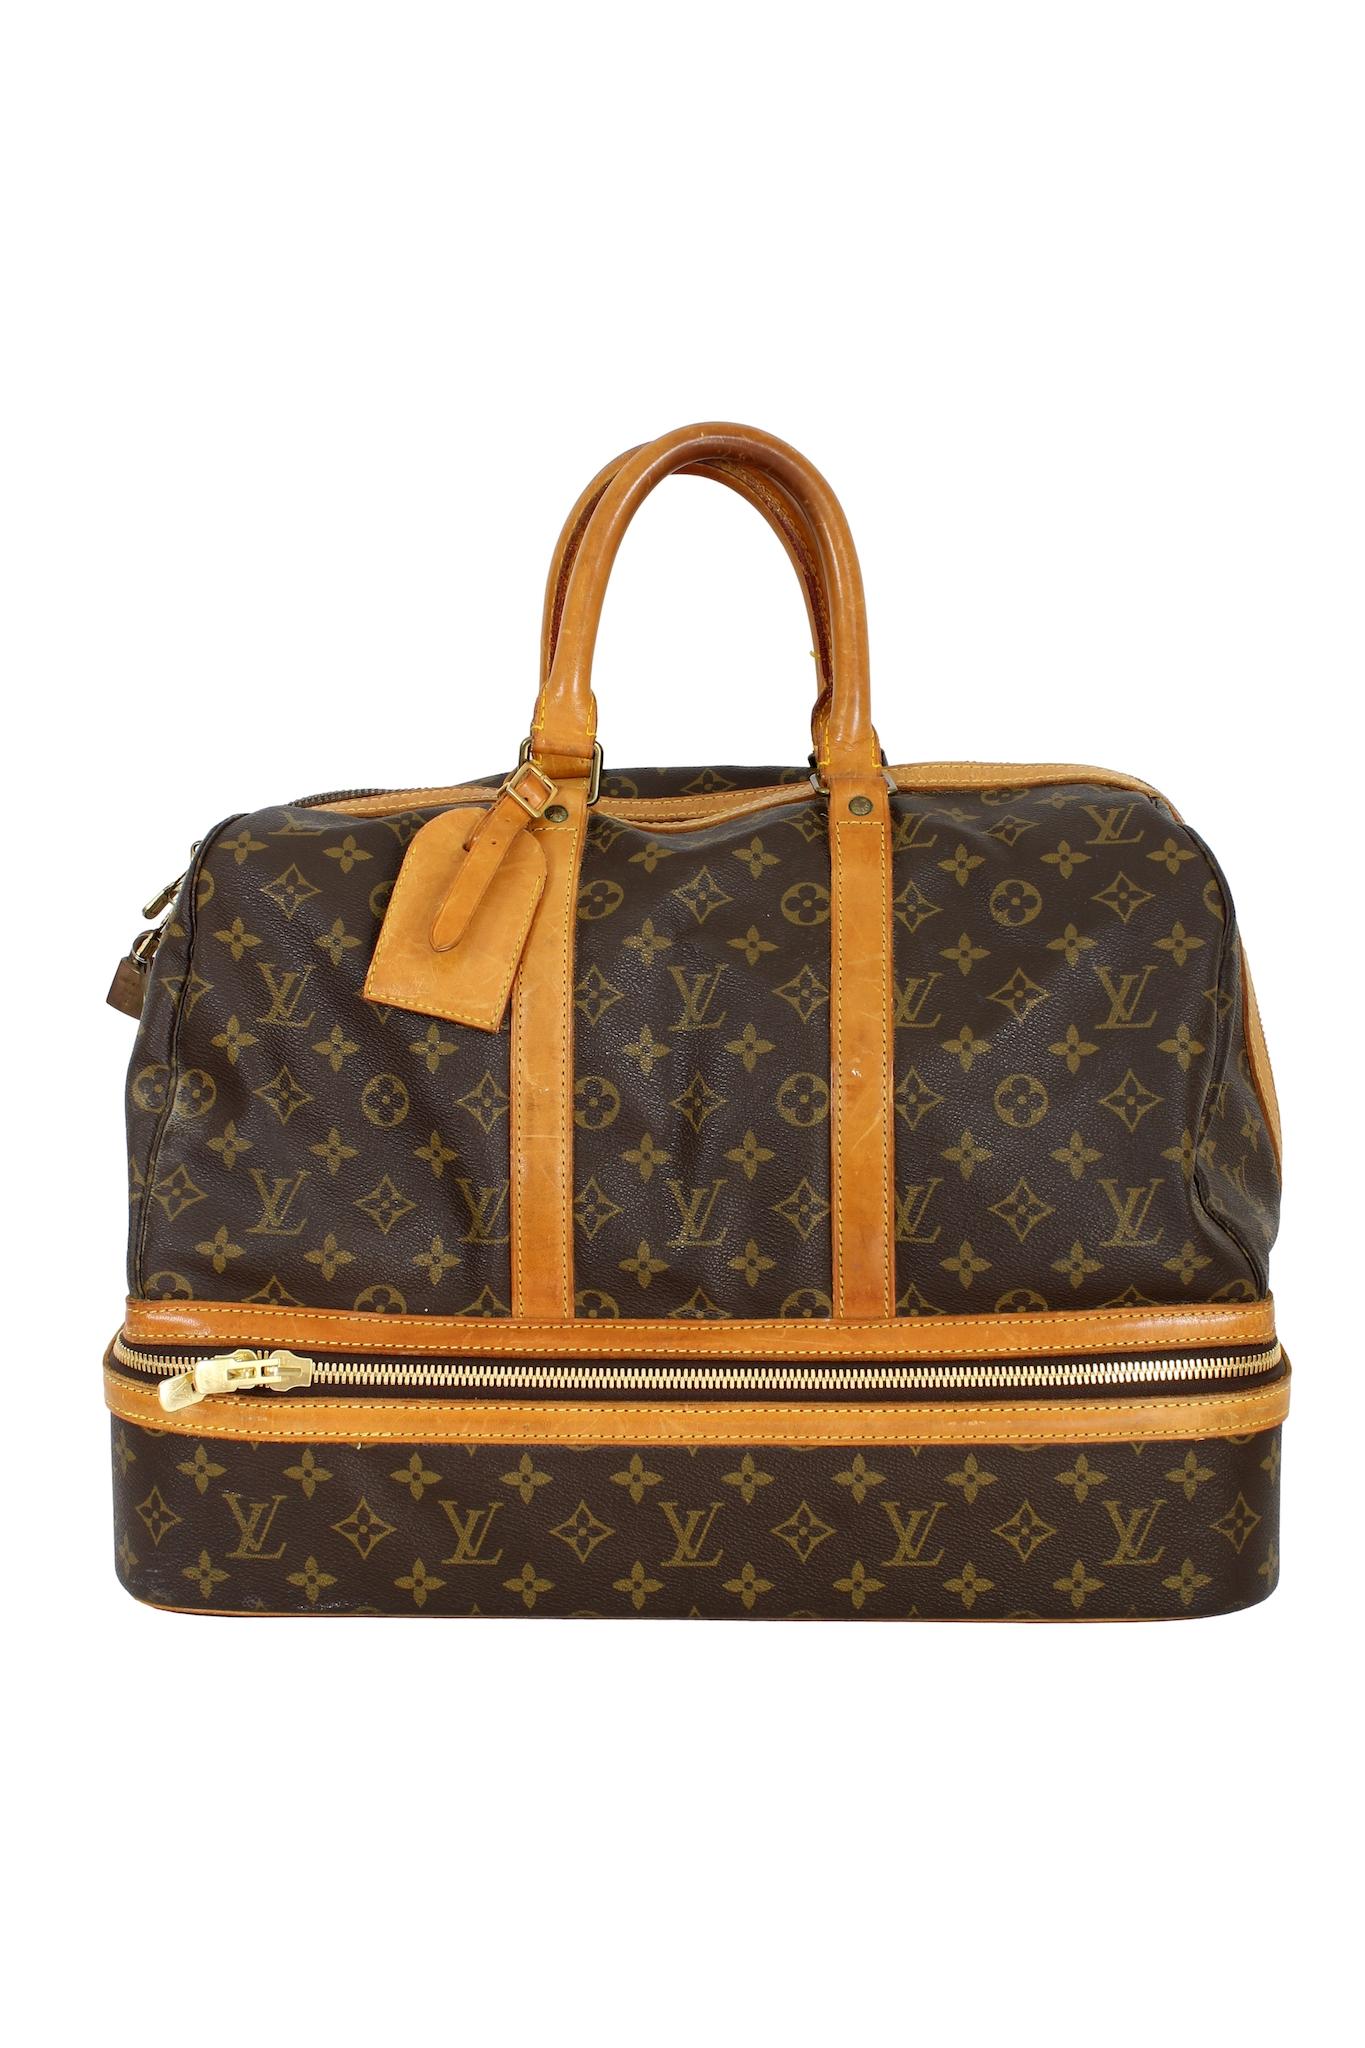 Louis Vuitton Sac Sport Luggage Bag Monogram Vintage 1980s In Good Condition For Sale In Brindisi, Bt